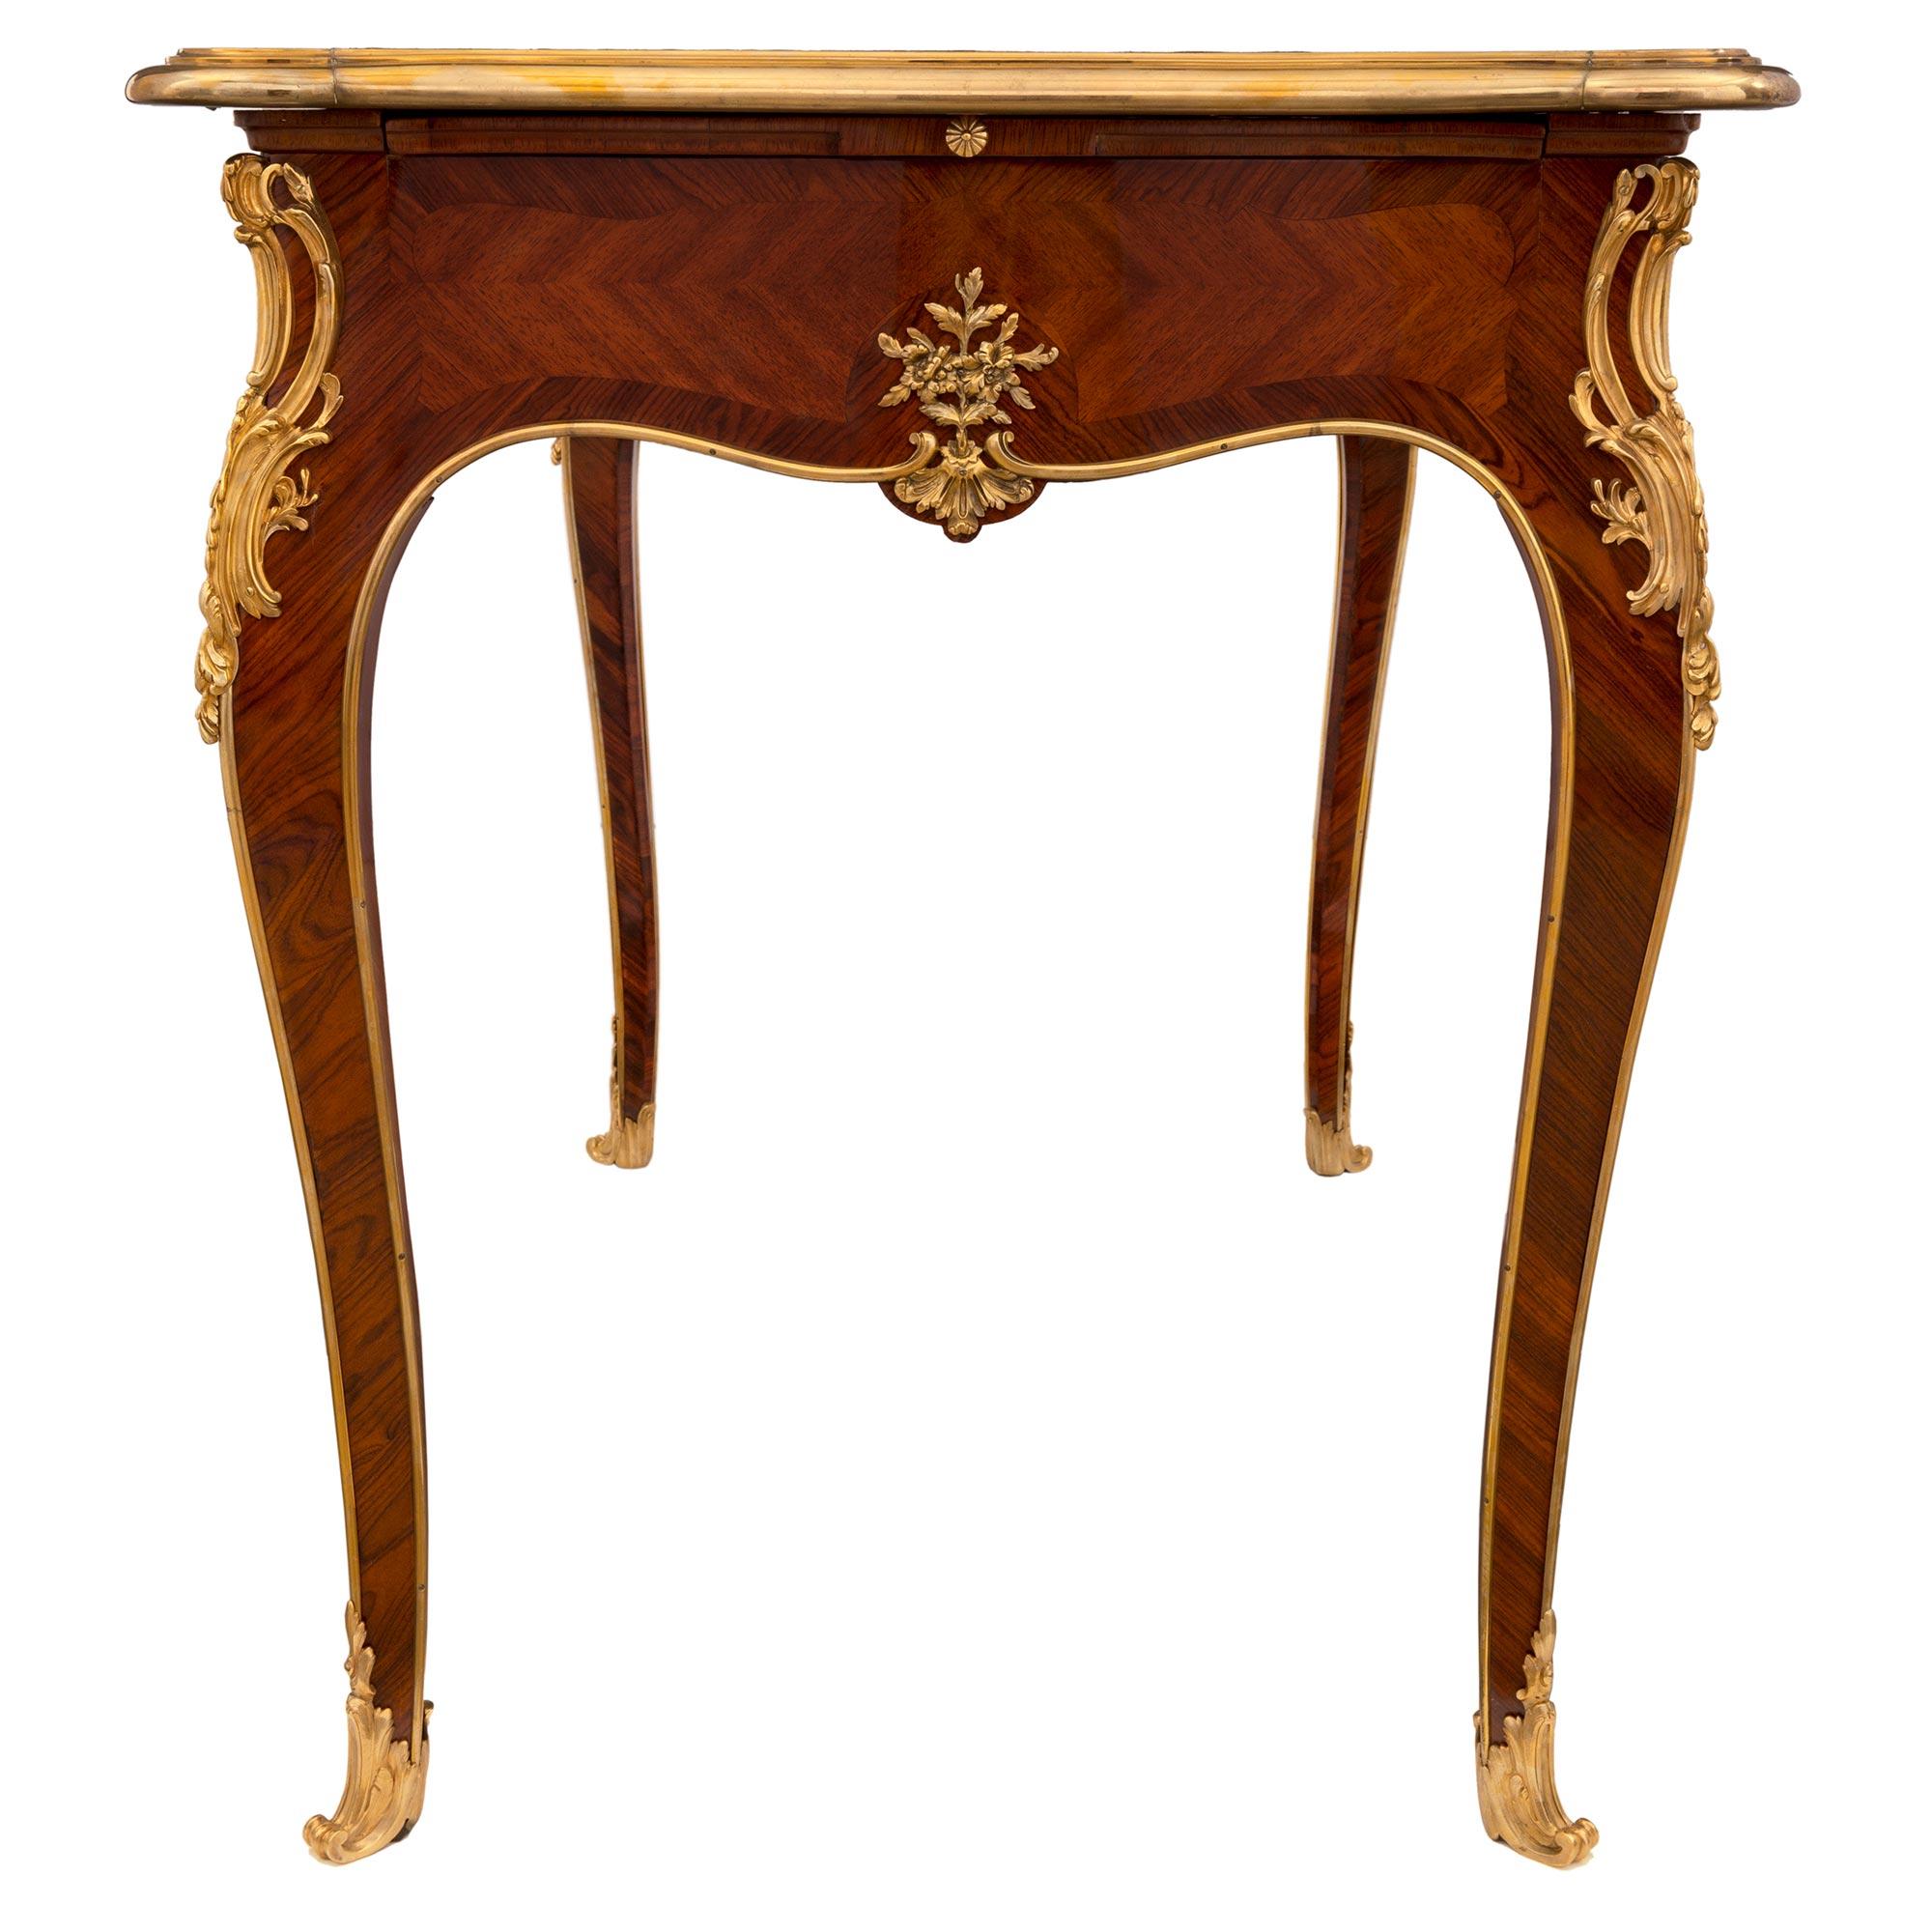 French Mid-19th Century Louis XV Style Kingwood and Ormolu Bureau Plat For Sale 2